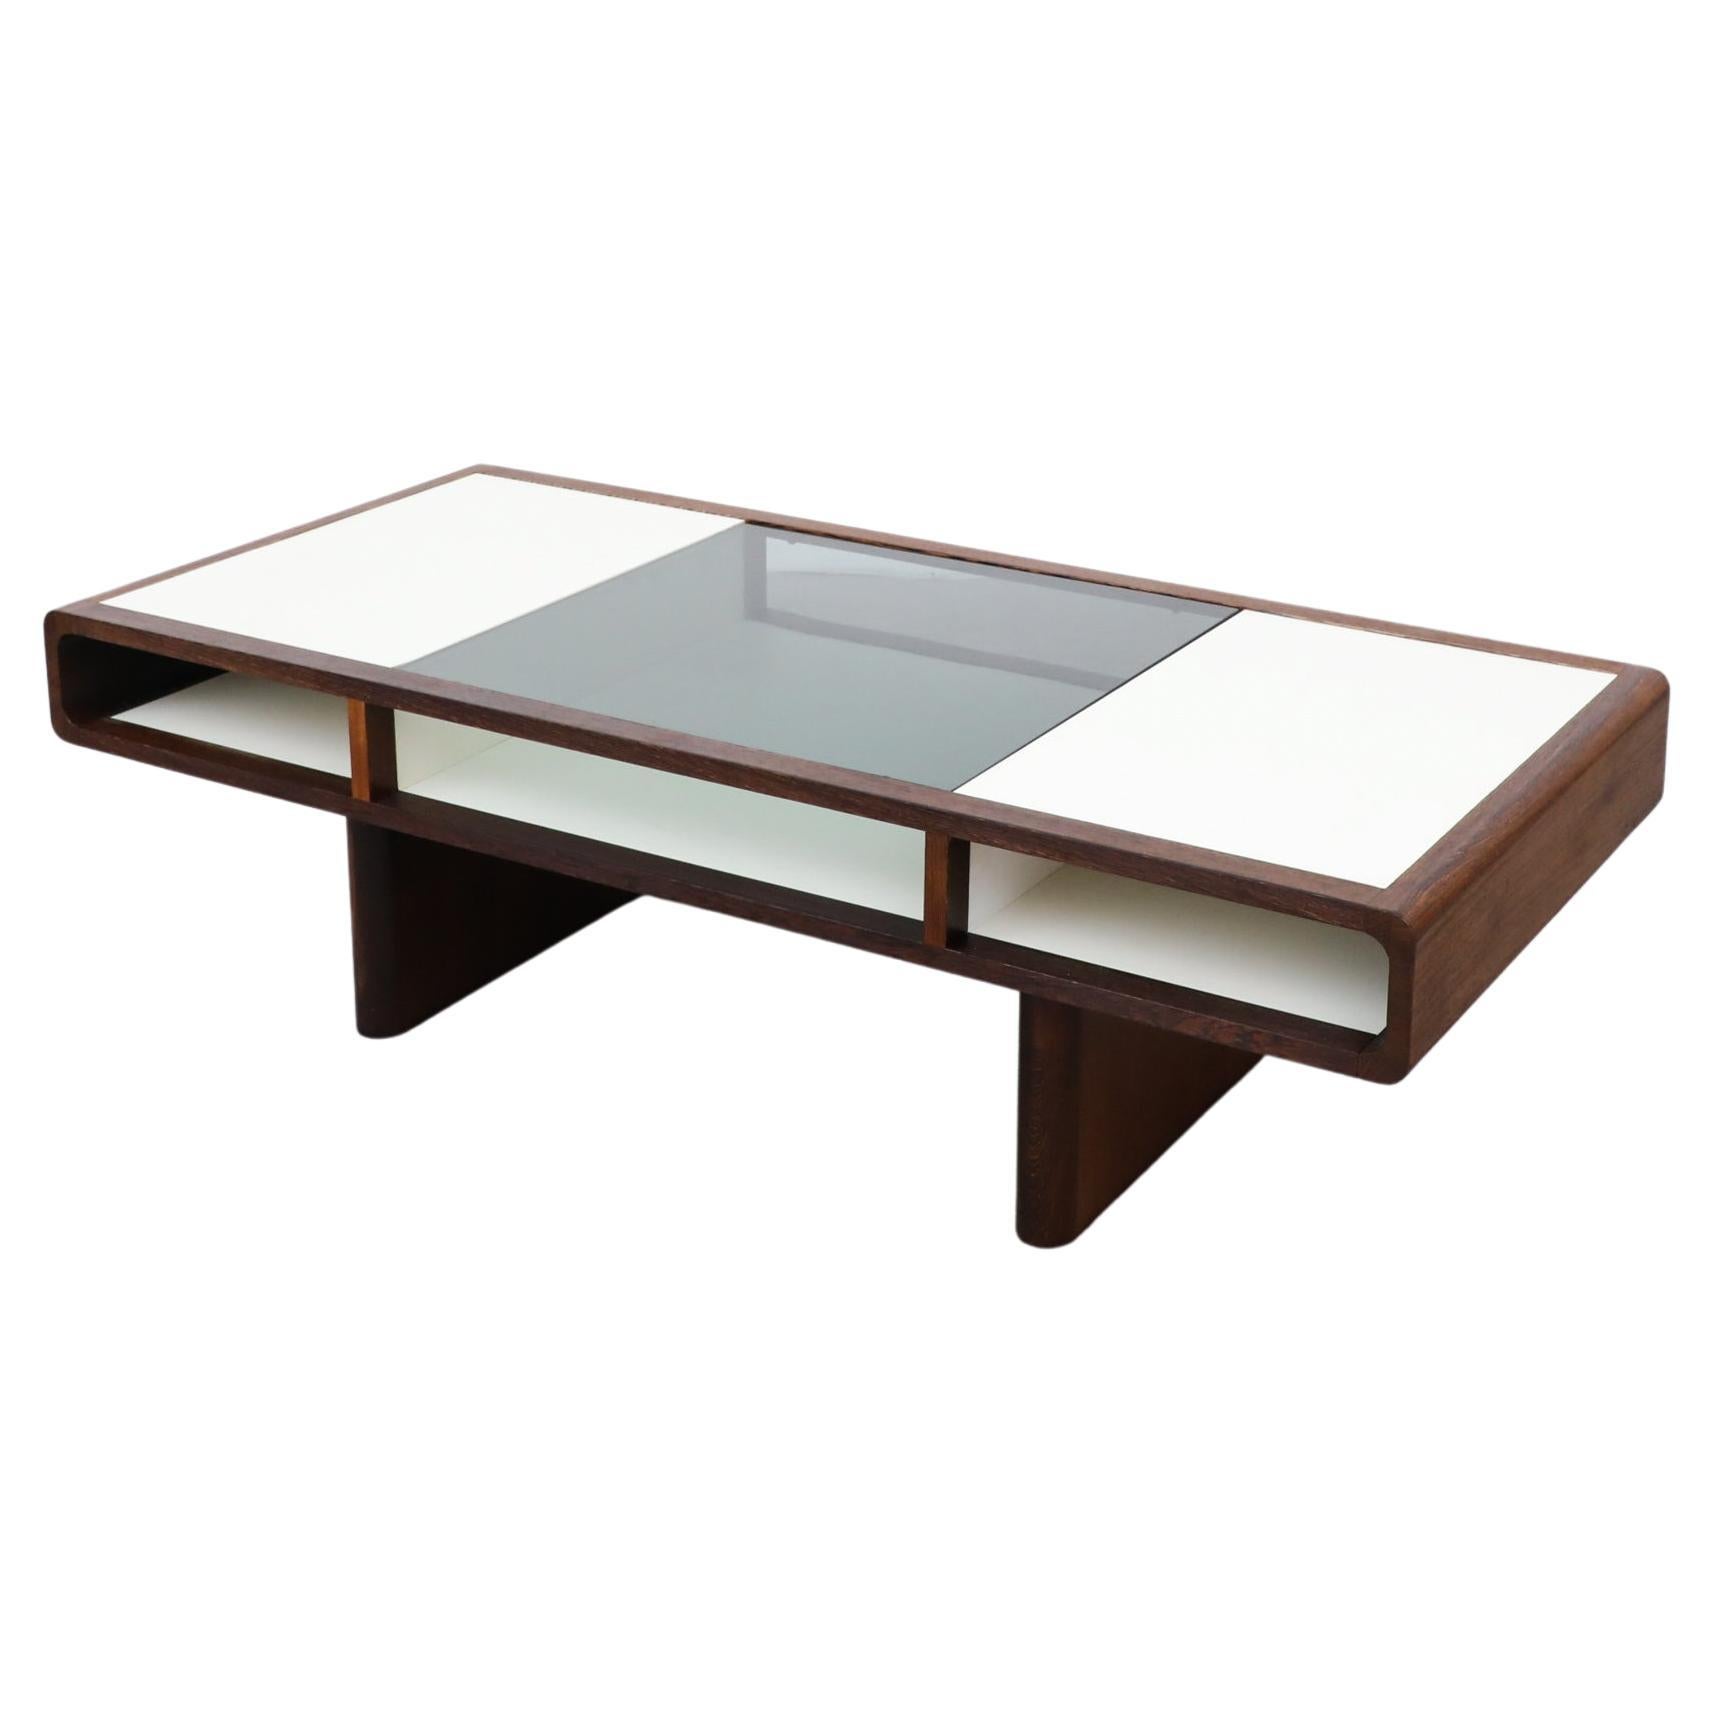 Jean Maneval Style Wenge and White Coffee Table